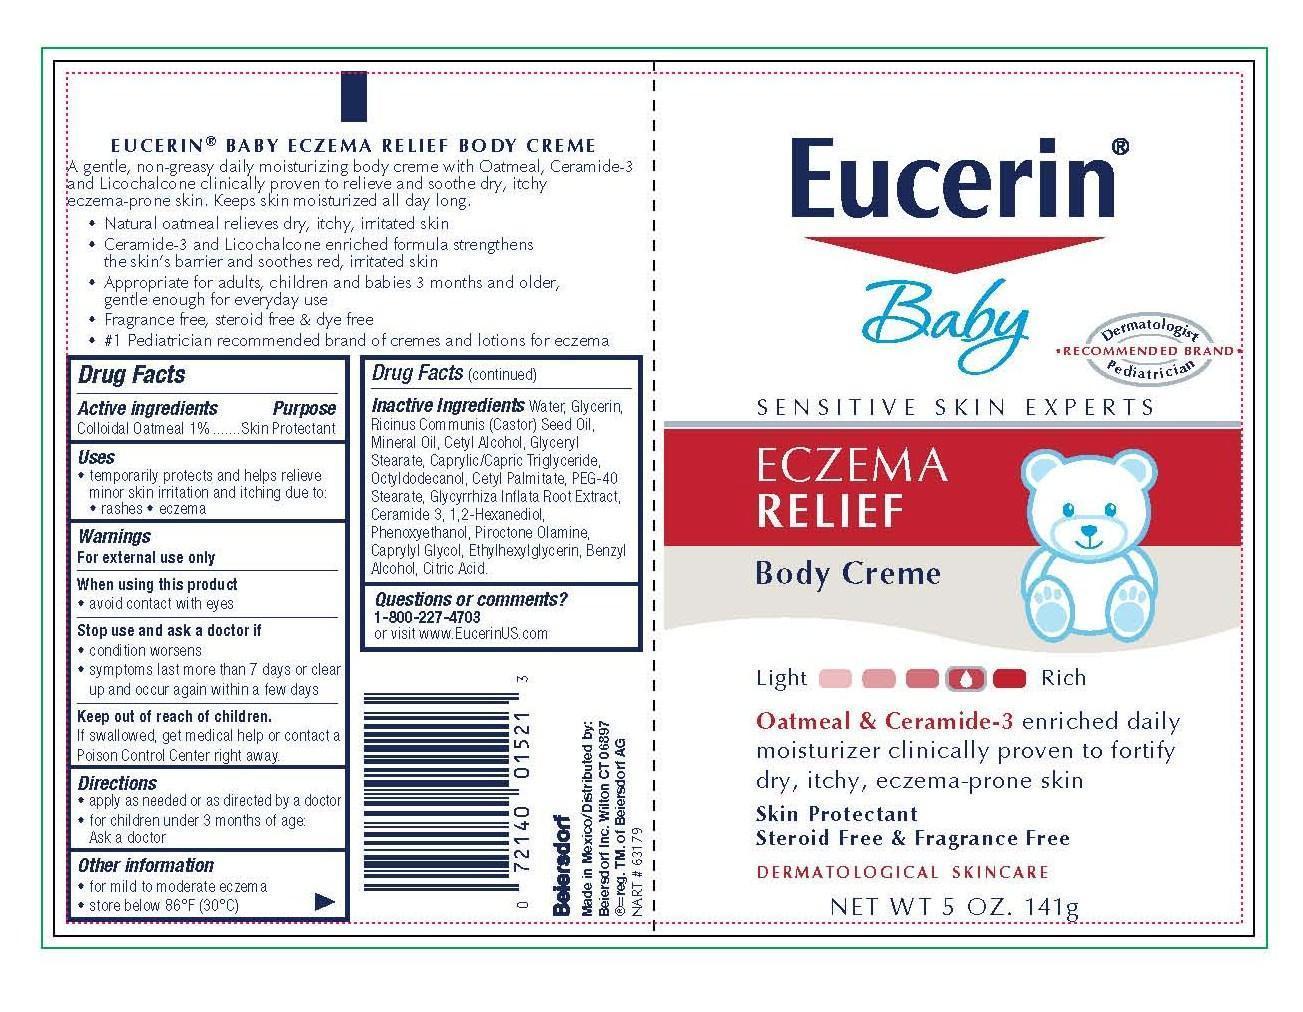 Pris Martyr Dykker BUY Oatmeal (Eucerin Eczema Relief Body) 1 g/100g from GNH India at the  best price available.